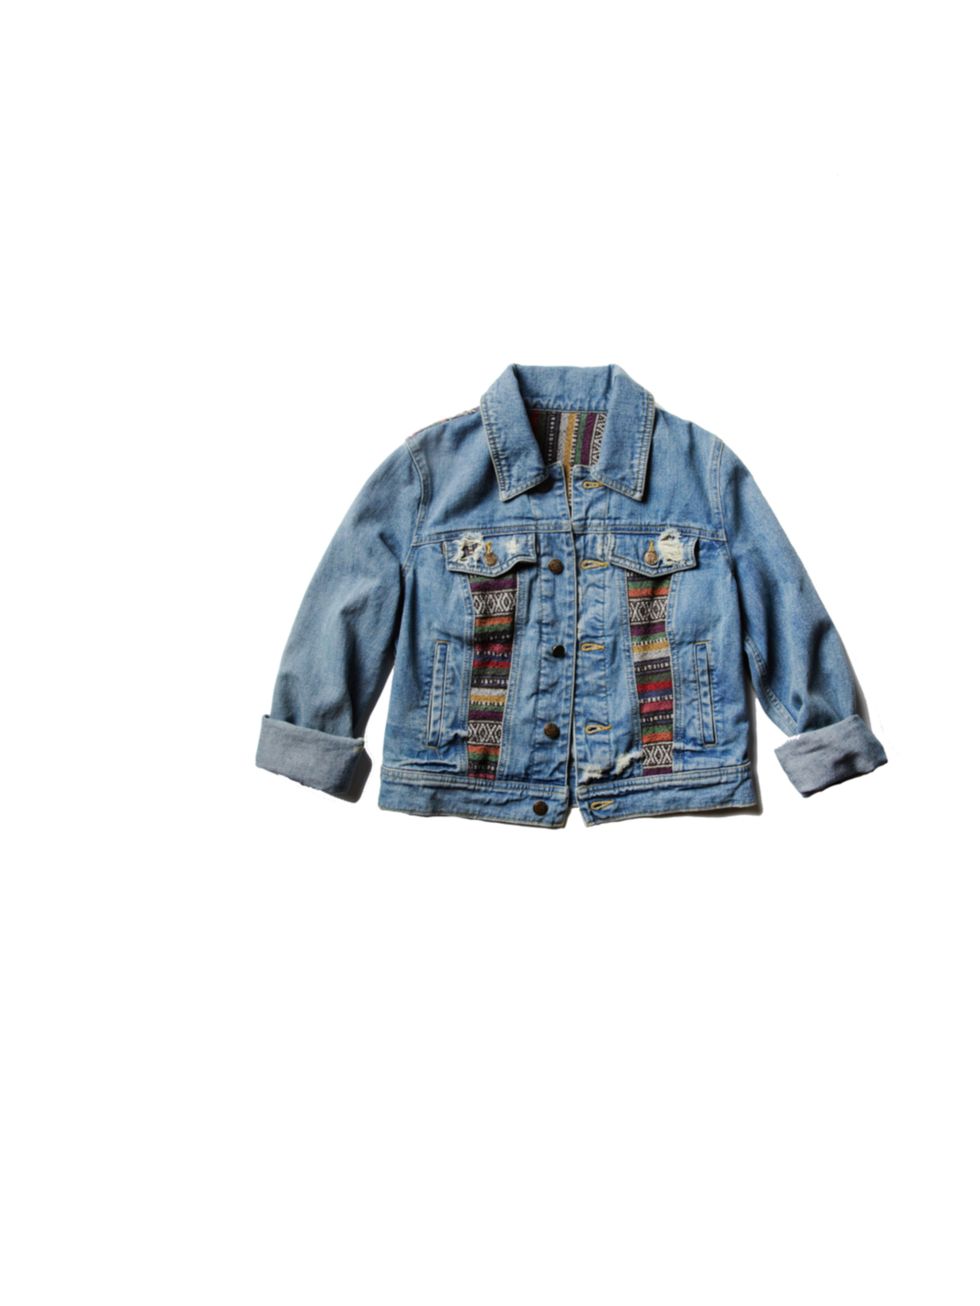 <p>With Bestival and Notting Hill Carnival on the horizon, youll need a suitably cool cover-up... <a href="http://www.freepeople.com/baja-denim-jacket-24881898/_/searchString/denim%20jacket/QUERYID/50157946575c1f349f000222/SEARCHPOSITION/5/CMCATEGORYID/6